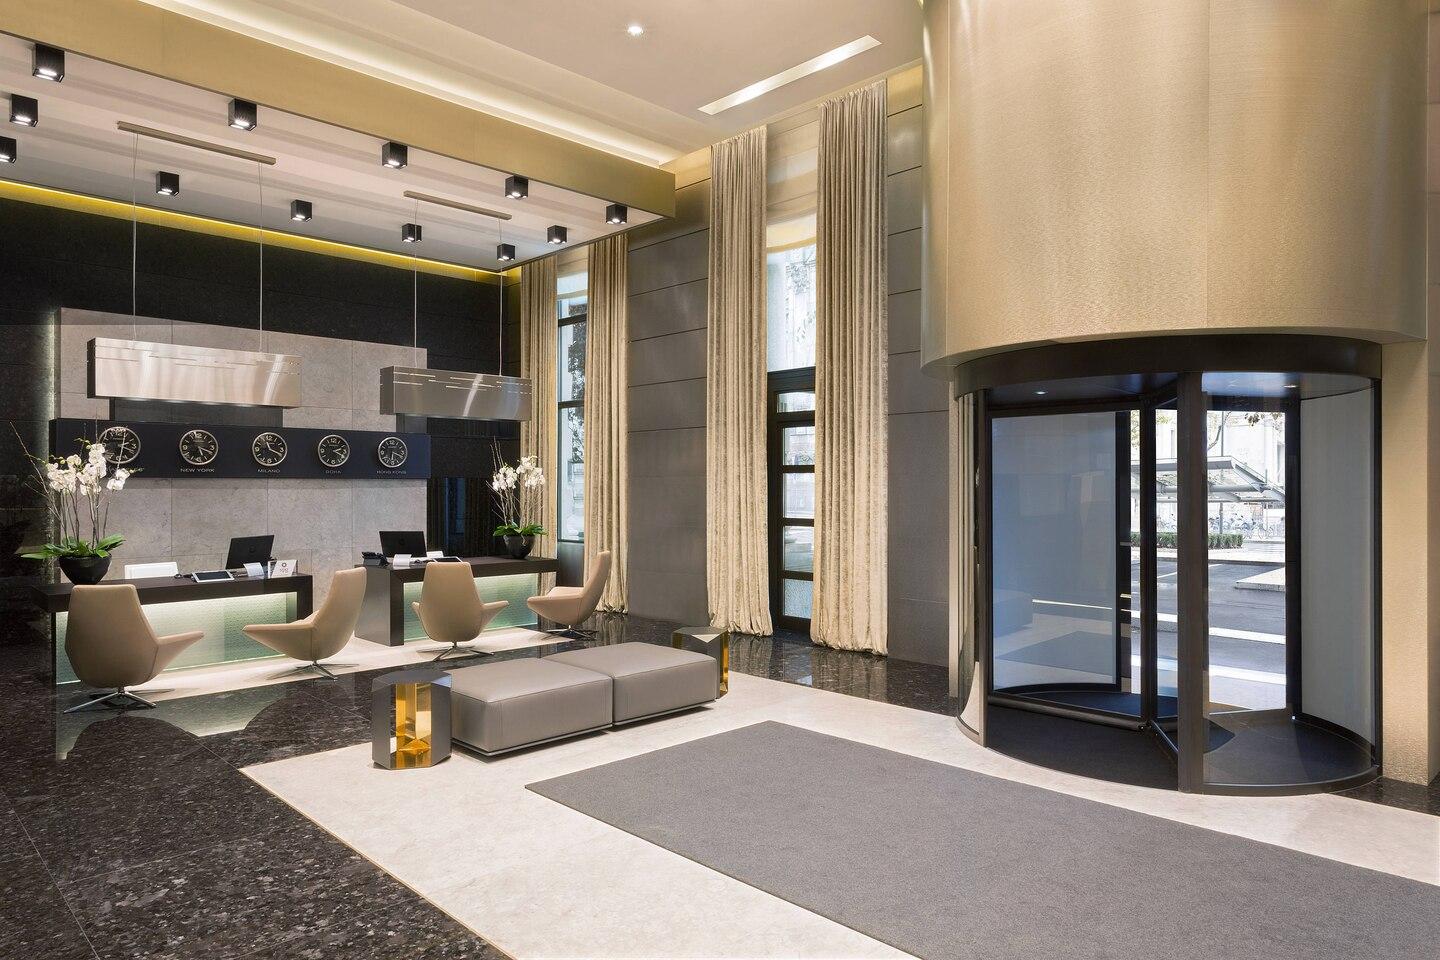 Vista Lobby Excelsior Hotel Gallia, a Luxury Collection Hotel, Milan